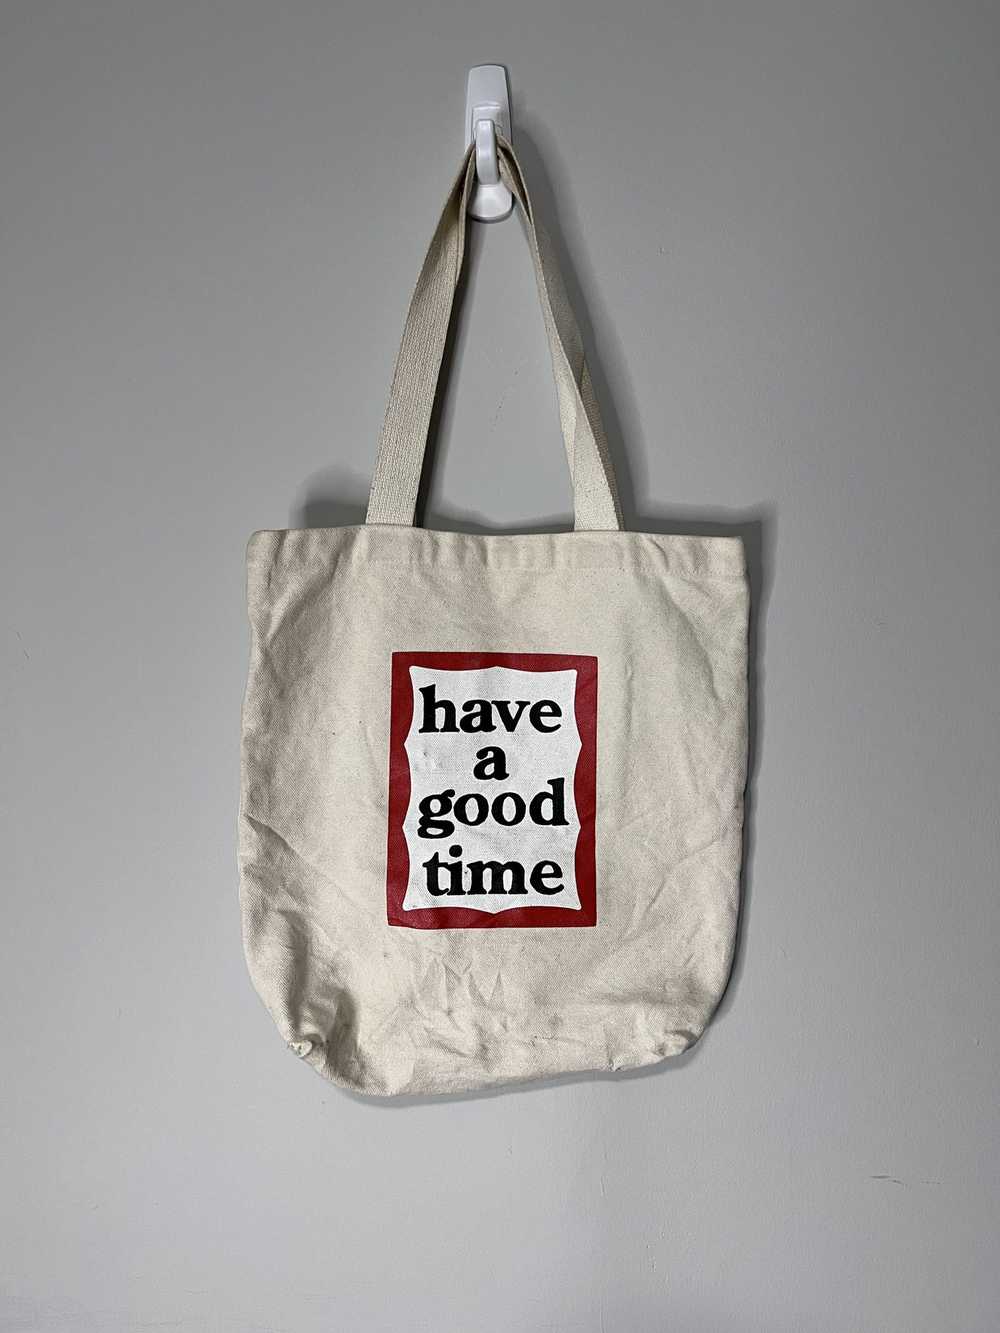 Have A Good Time Have A Good Time - Tote Bag - image 1